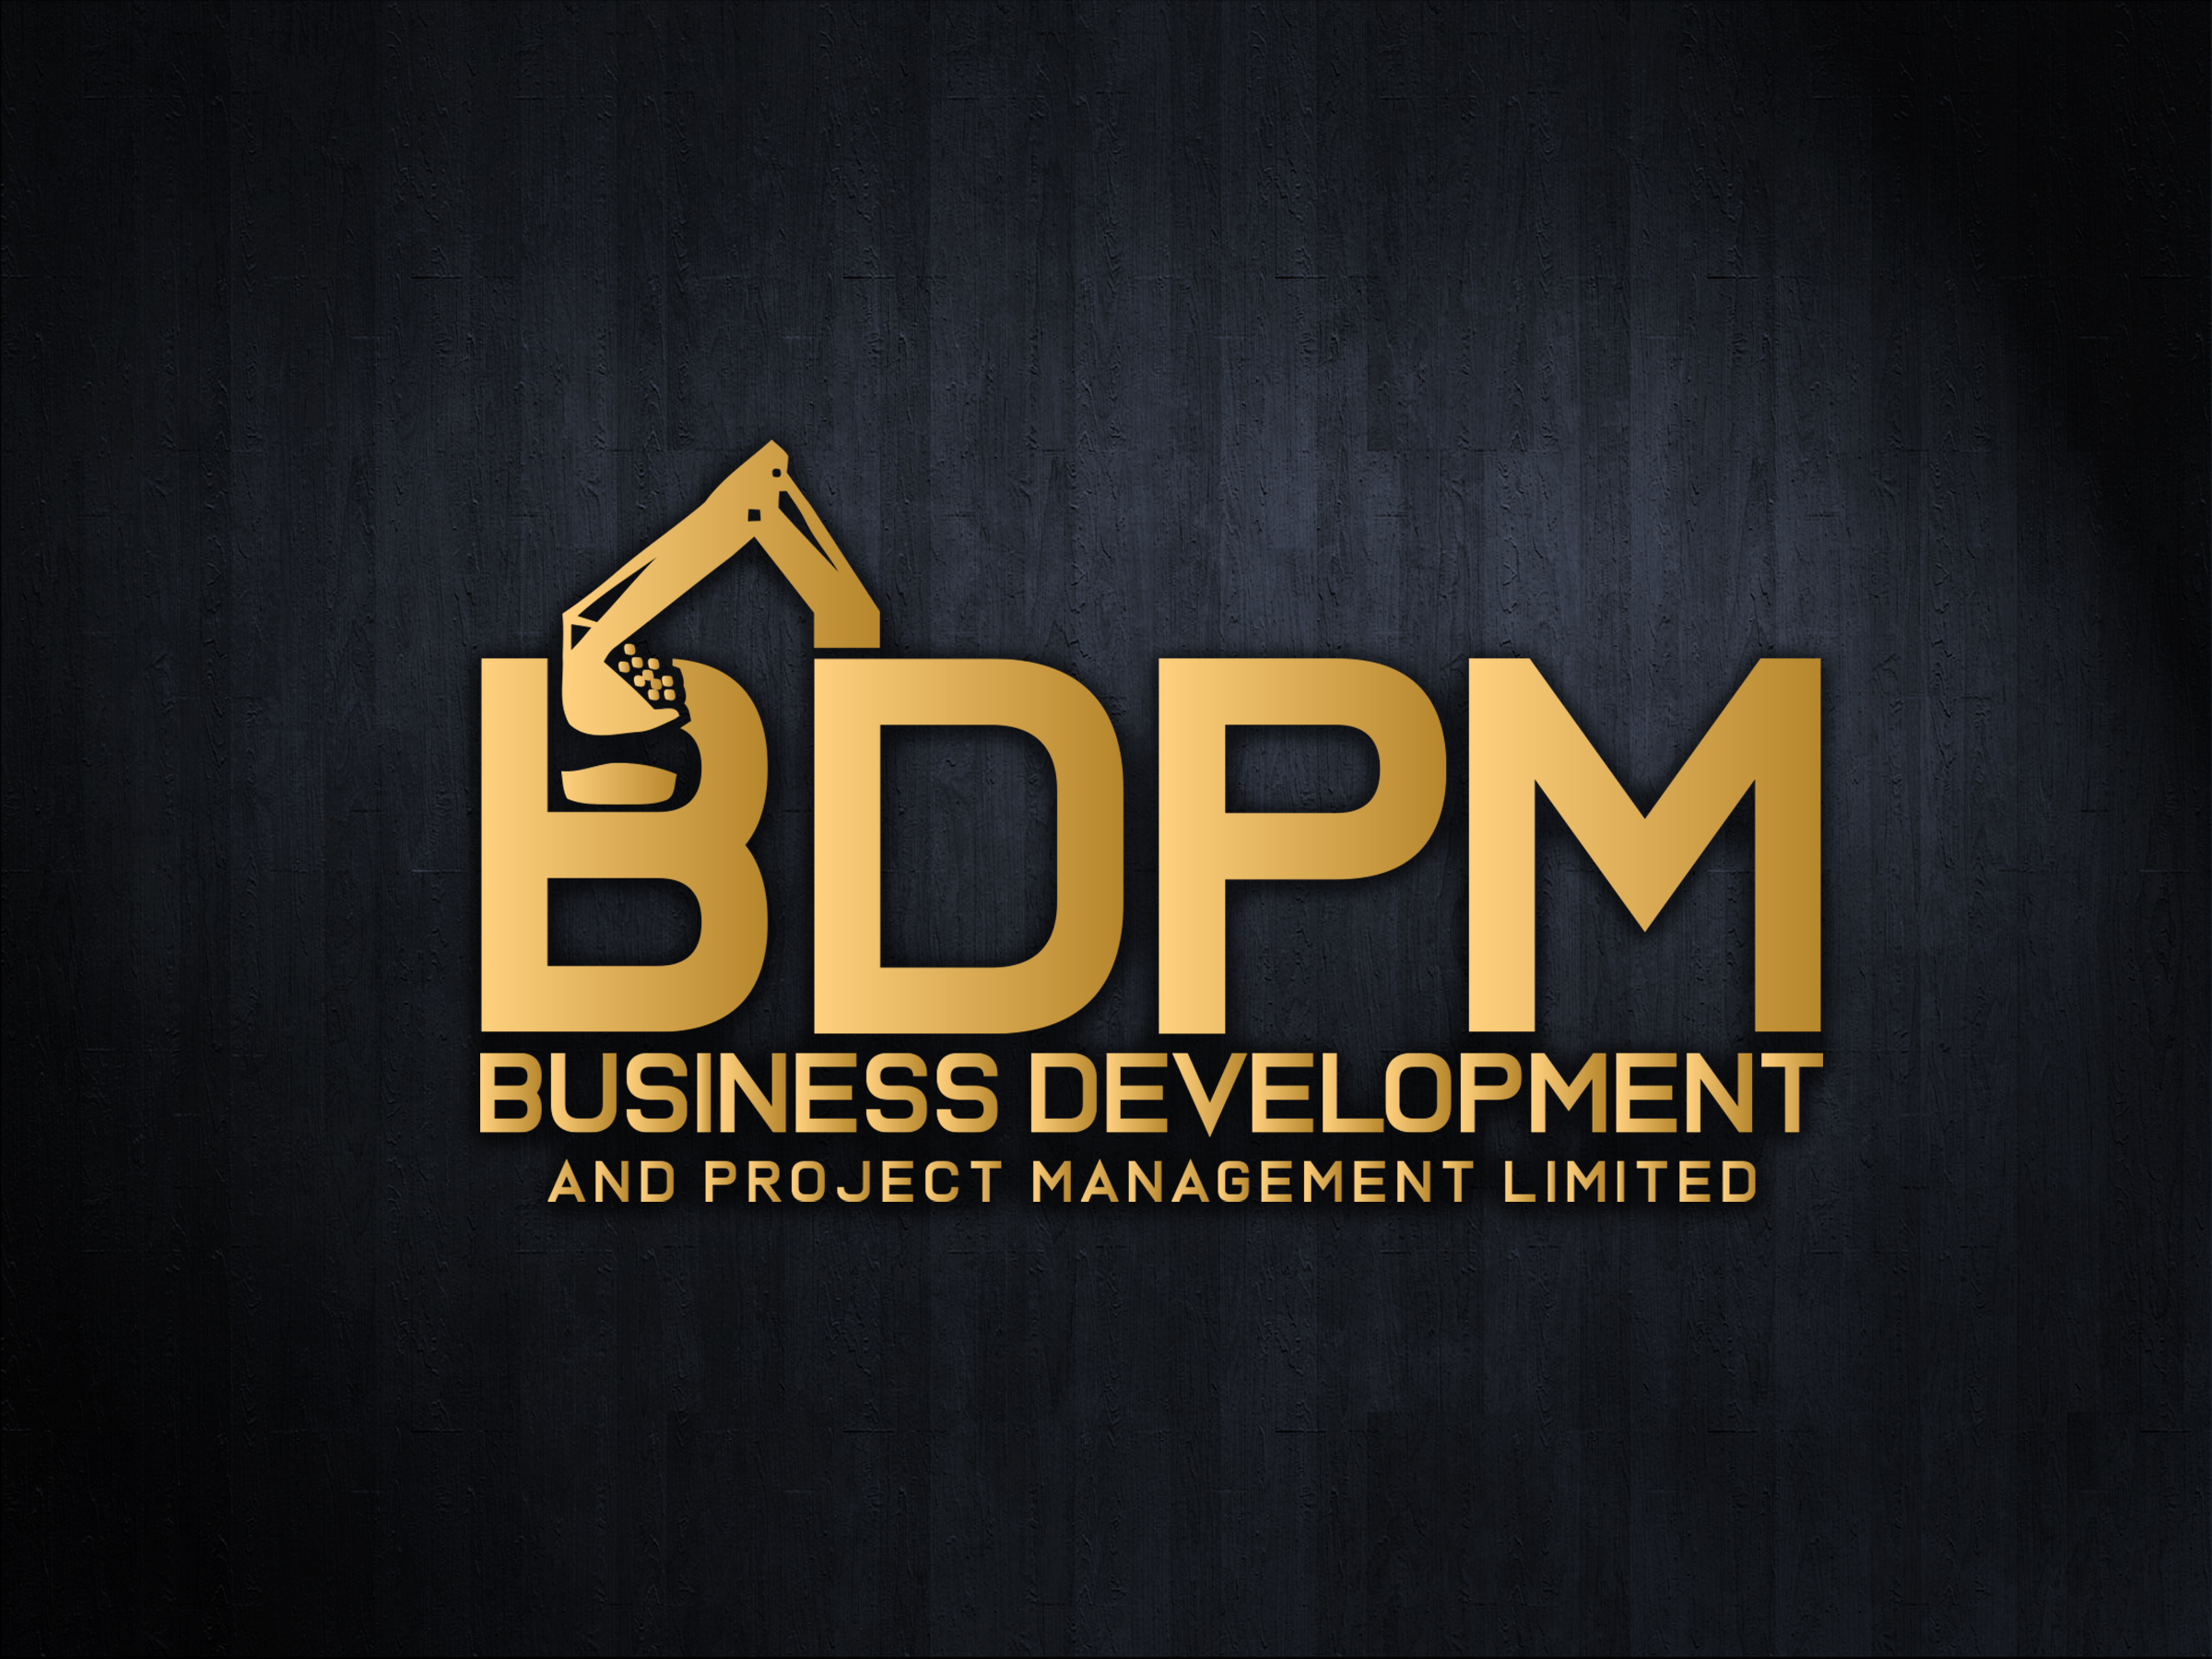 Company BDPM - Business Development And Project Management Limited. Description and contact information.